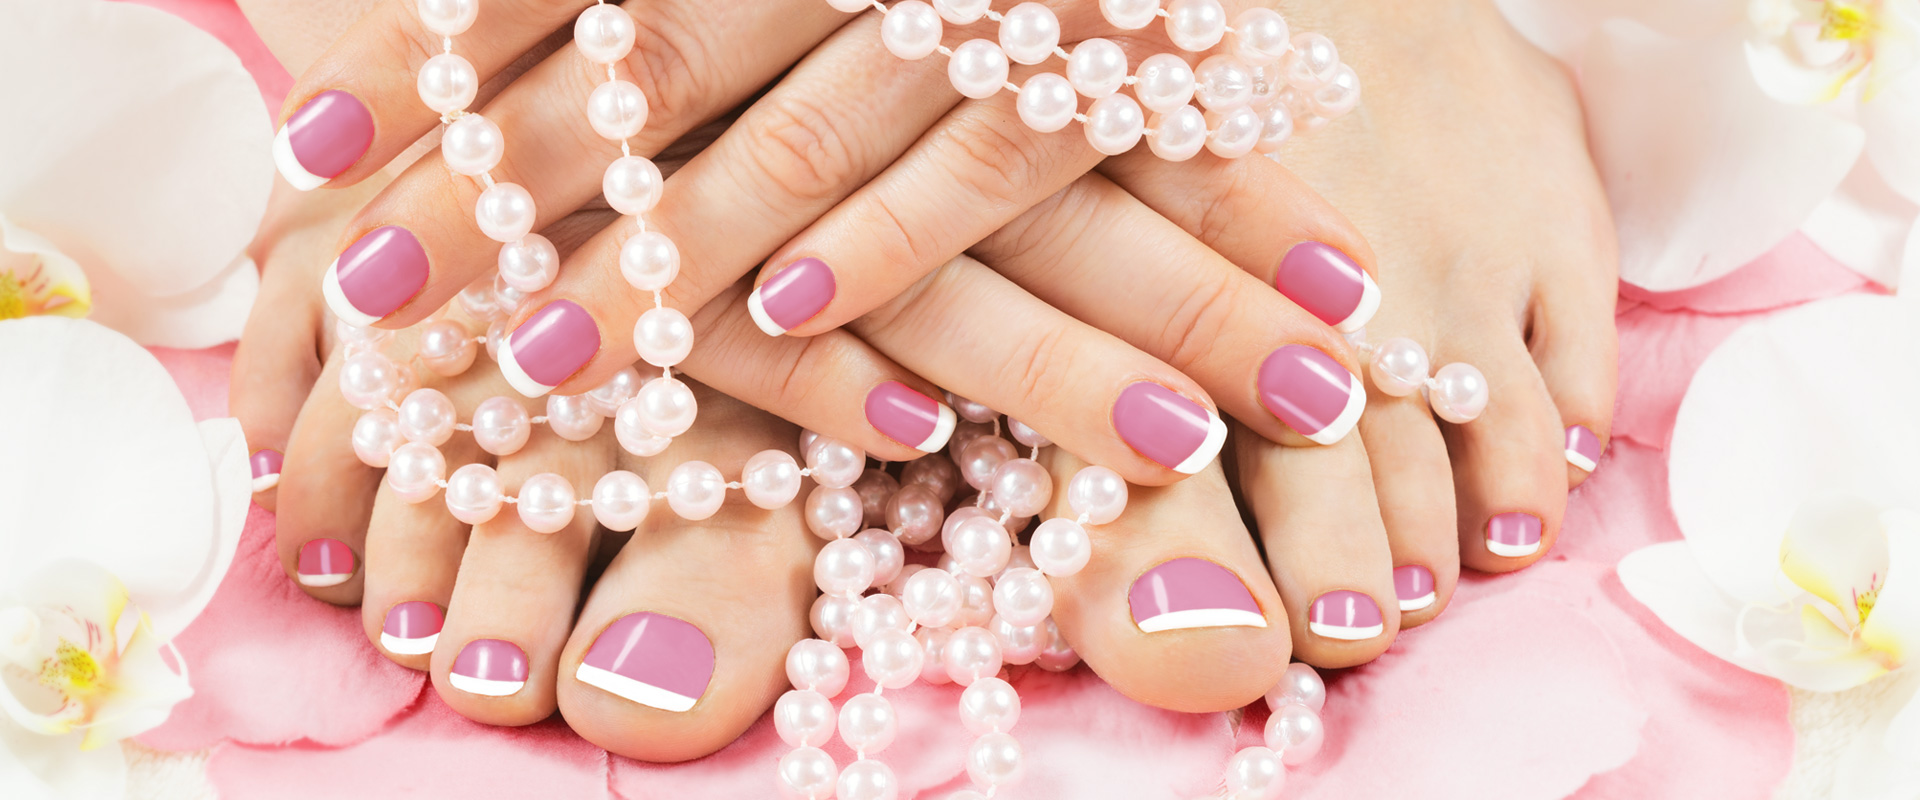 3. Manicures and Pedicures - wide 4